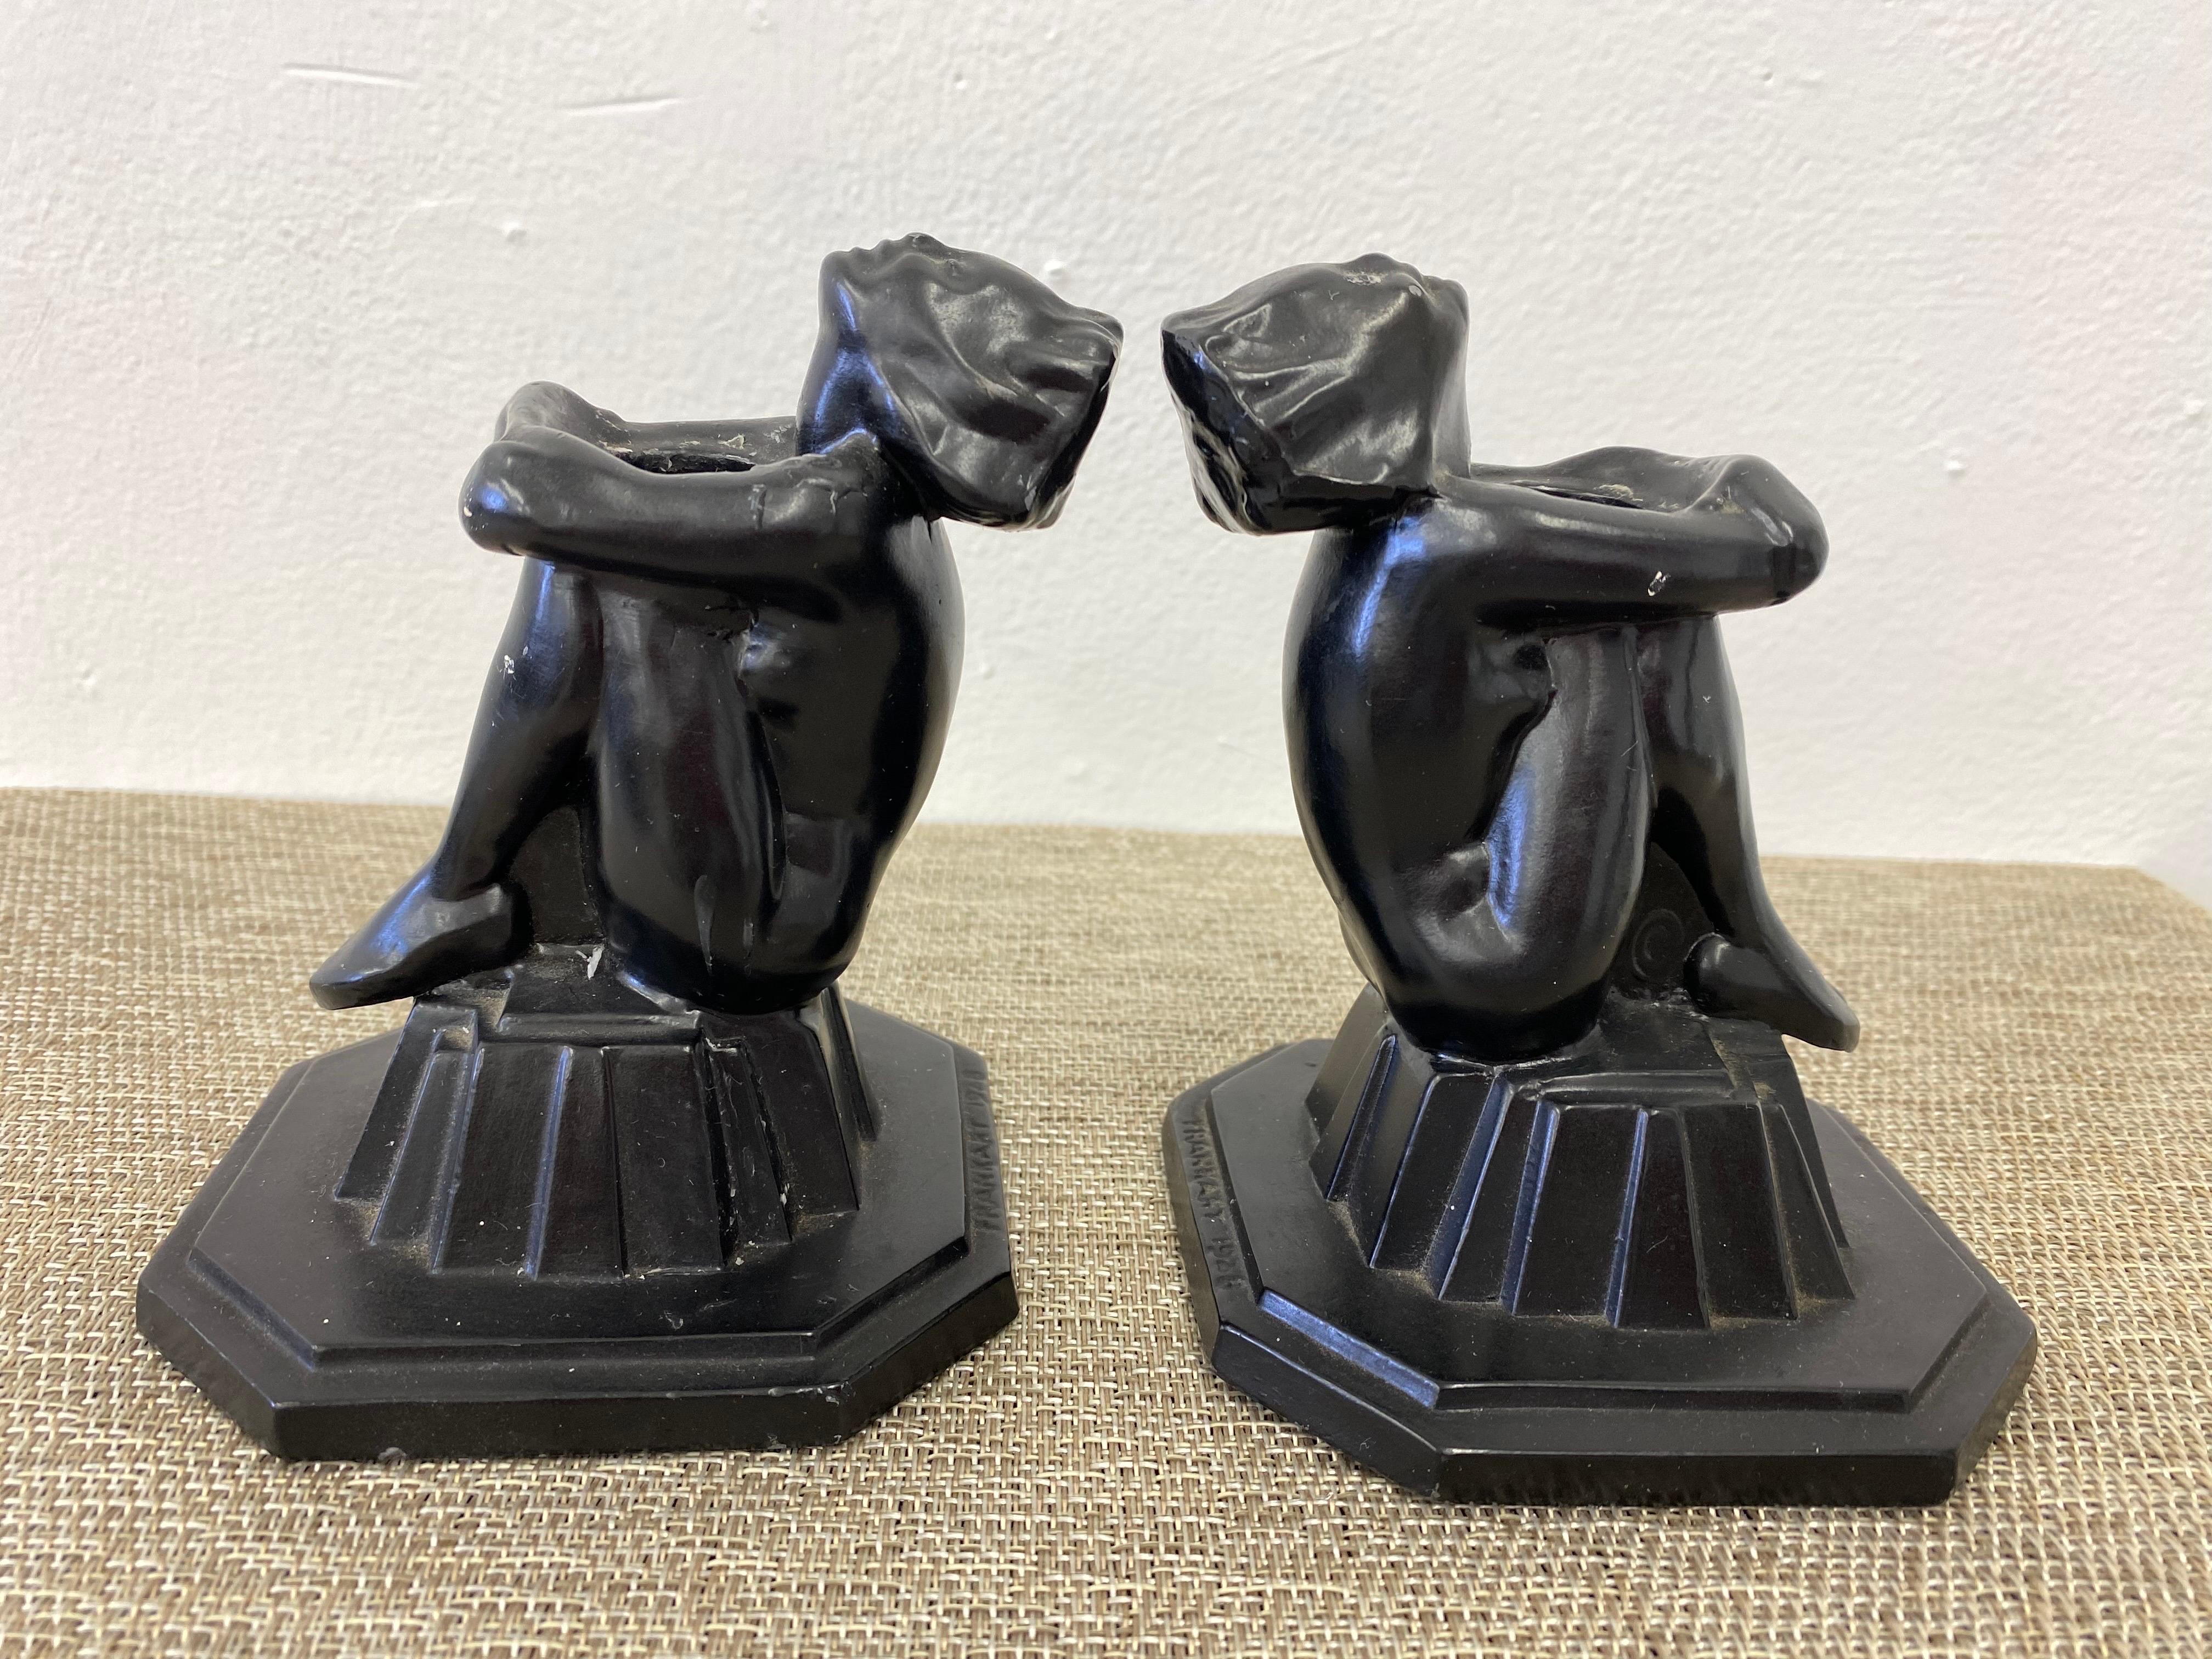 Pair of Frankart Kneeling Ladies Candlesticks,  no. C106.  In very nice original condition.  Black paint shows typical wear and signs of use.